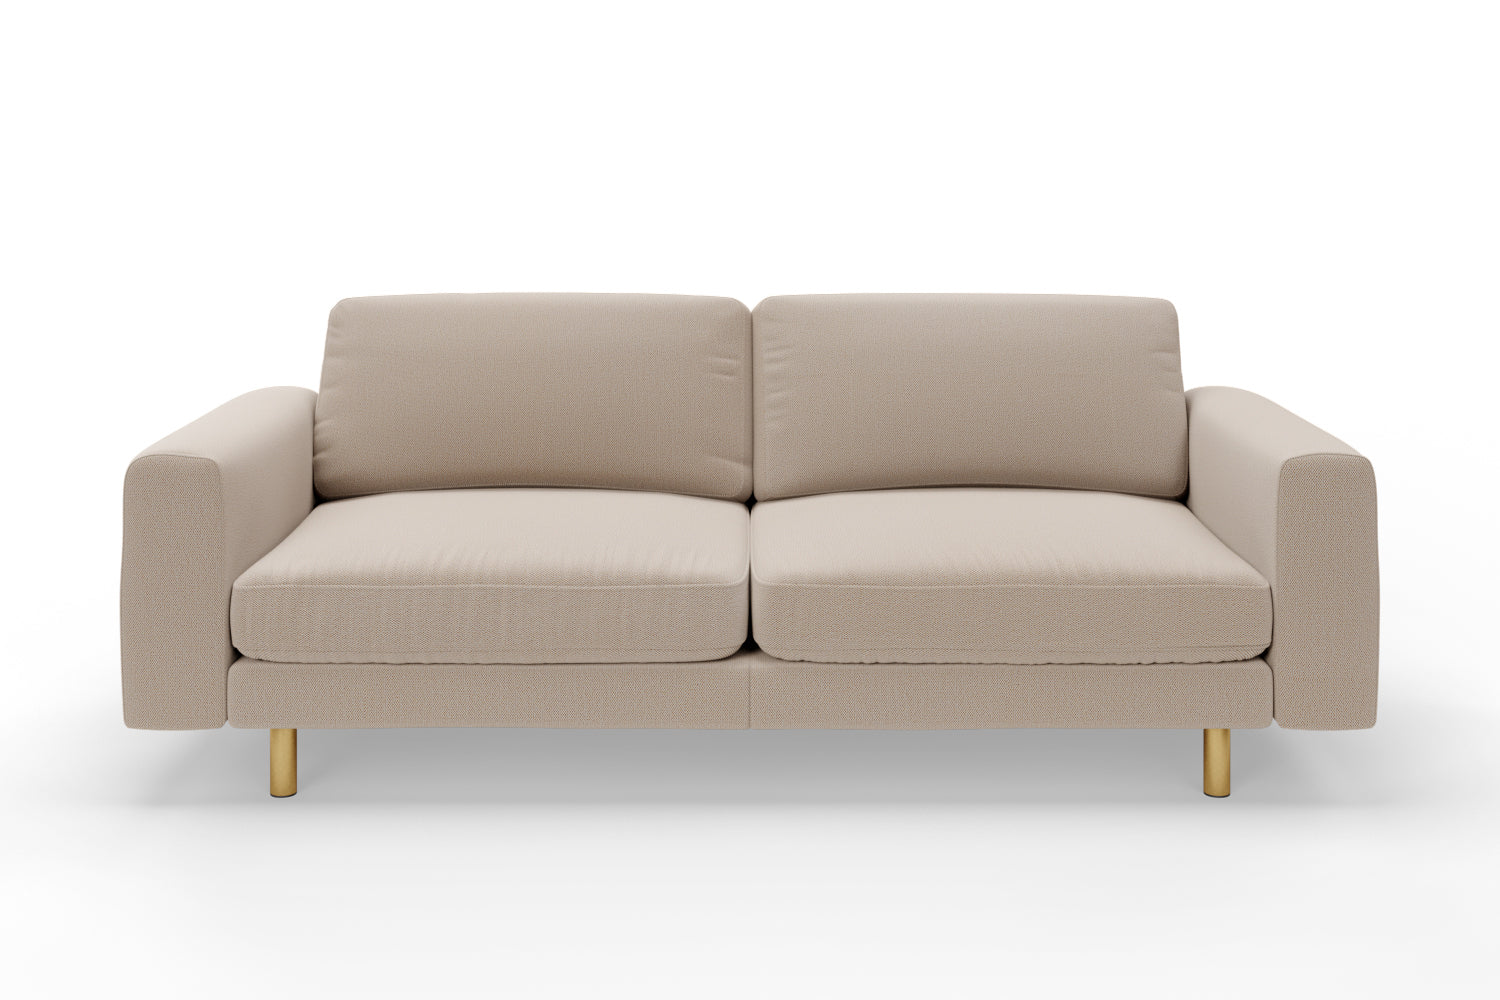 SNUG | The Big Chill 3 Seater Sofa in Oatmeal variant_40414878793776